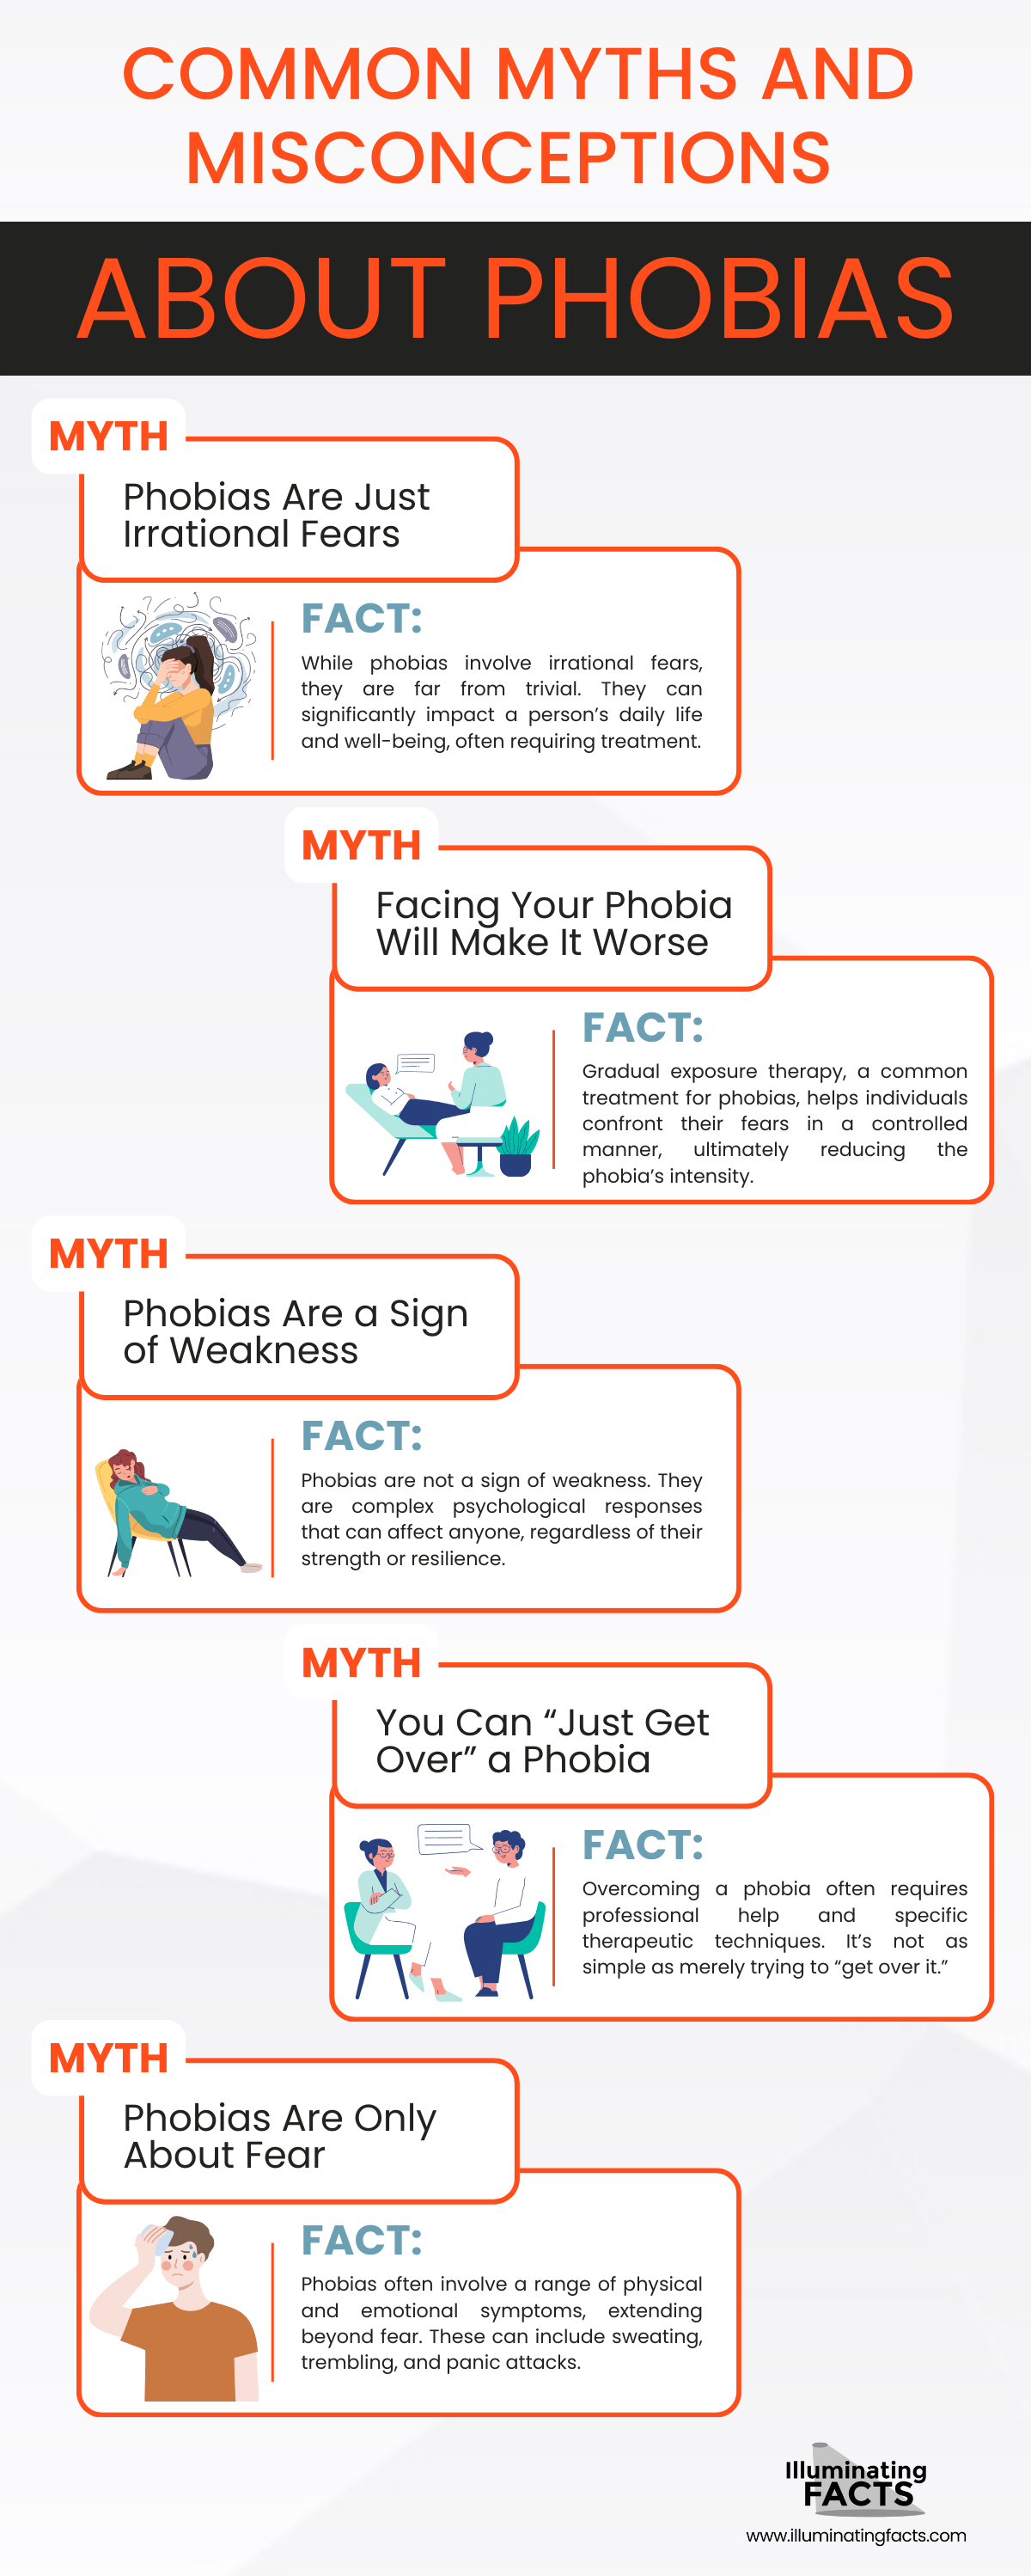 Common Myths and Misconceptions about Phobias